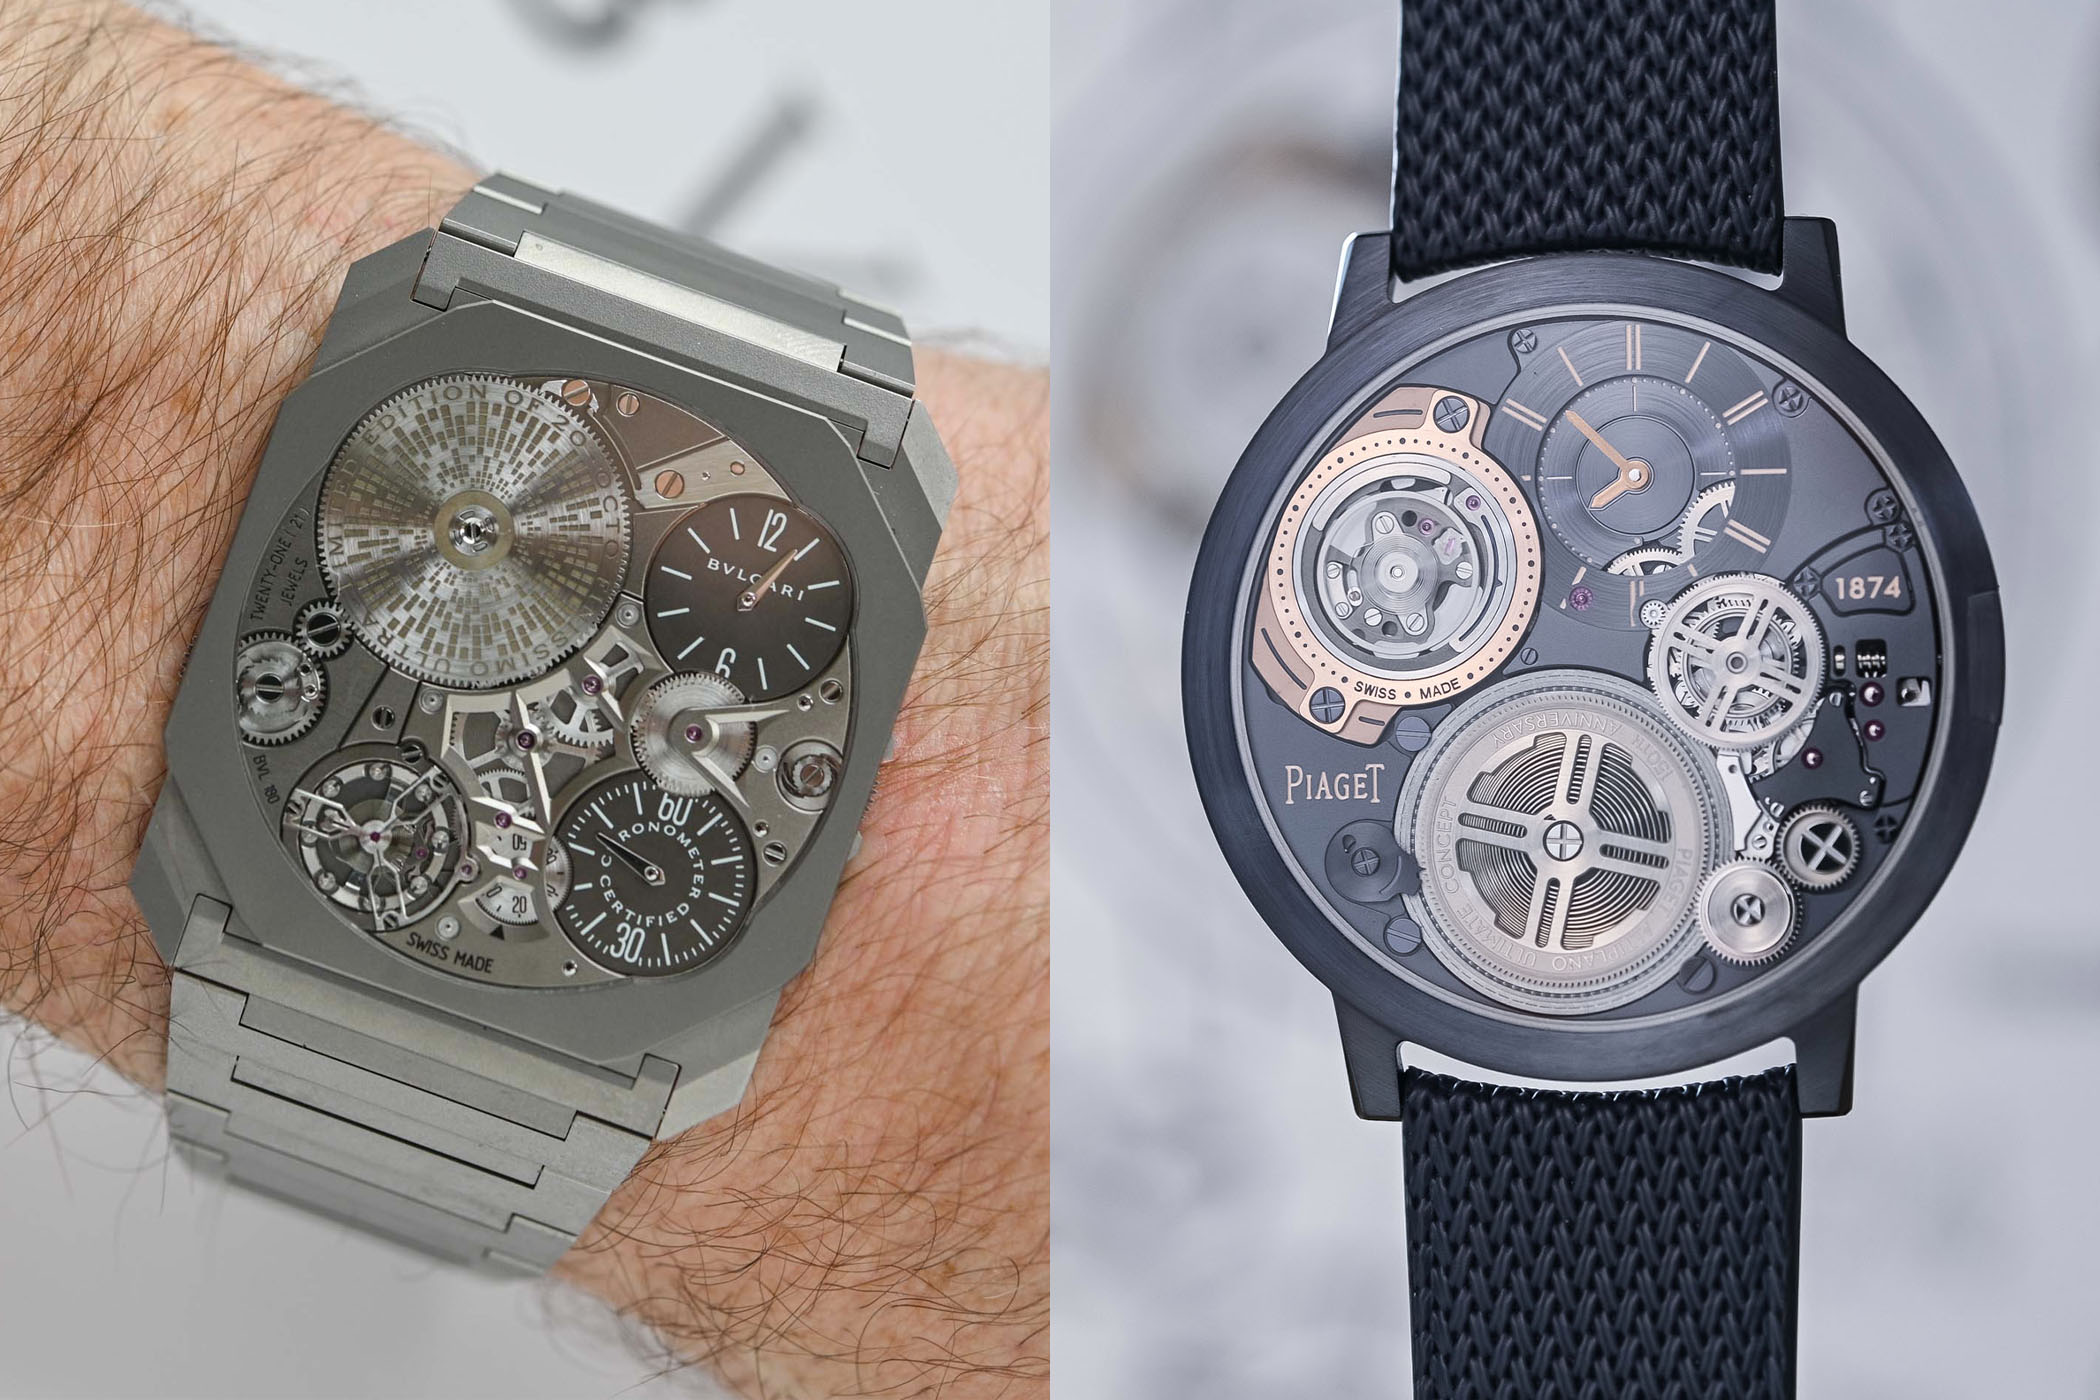 The Battle for the World’s Thinnest Watches (Incl. Video)